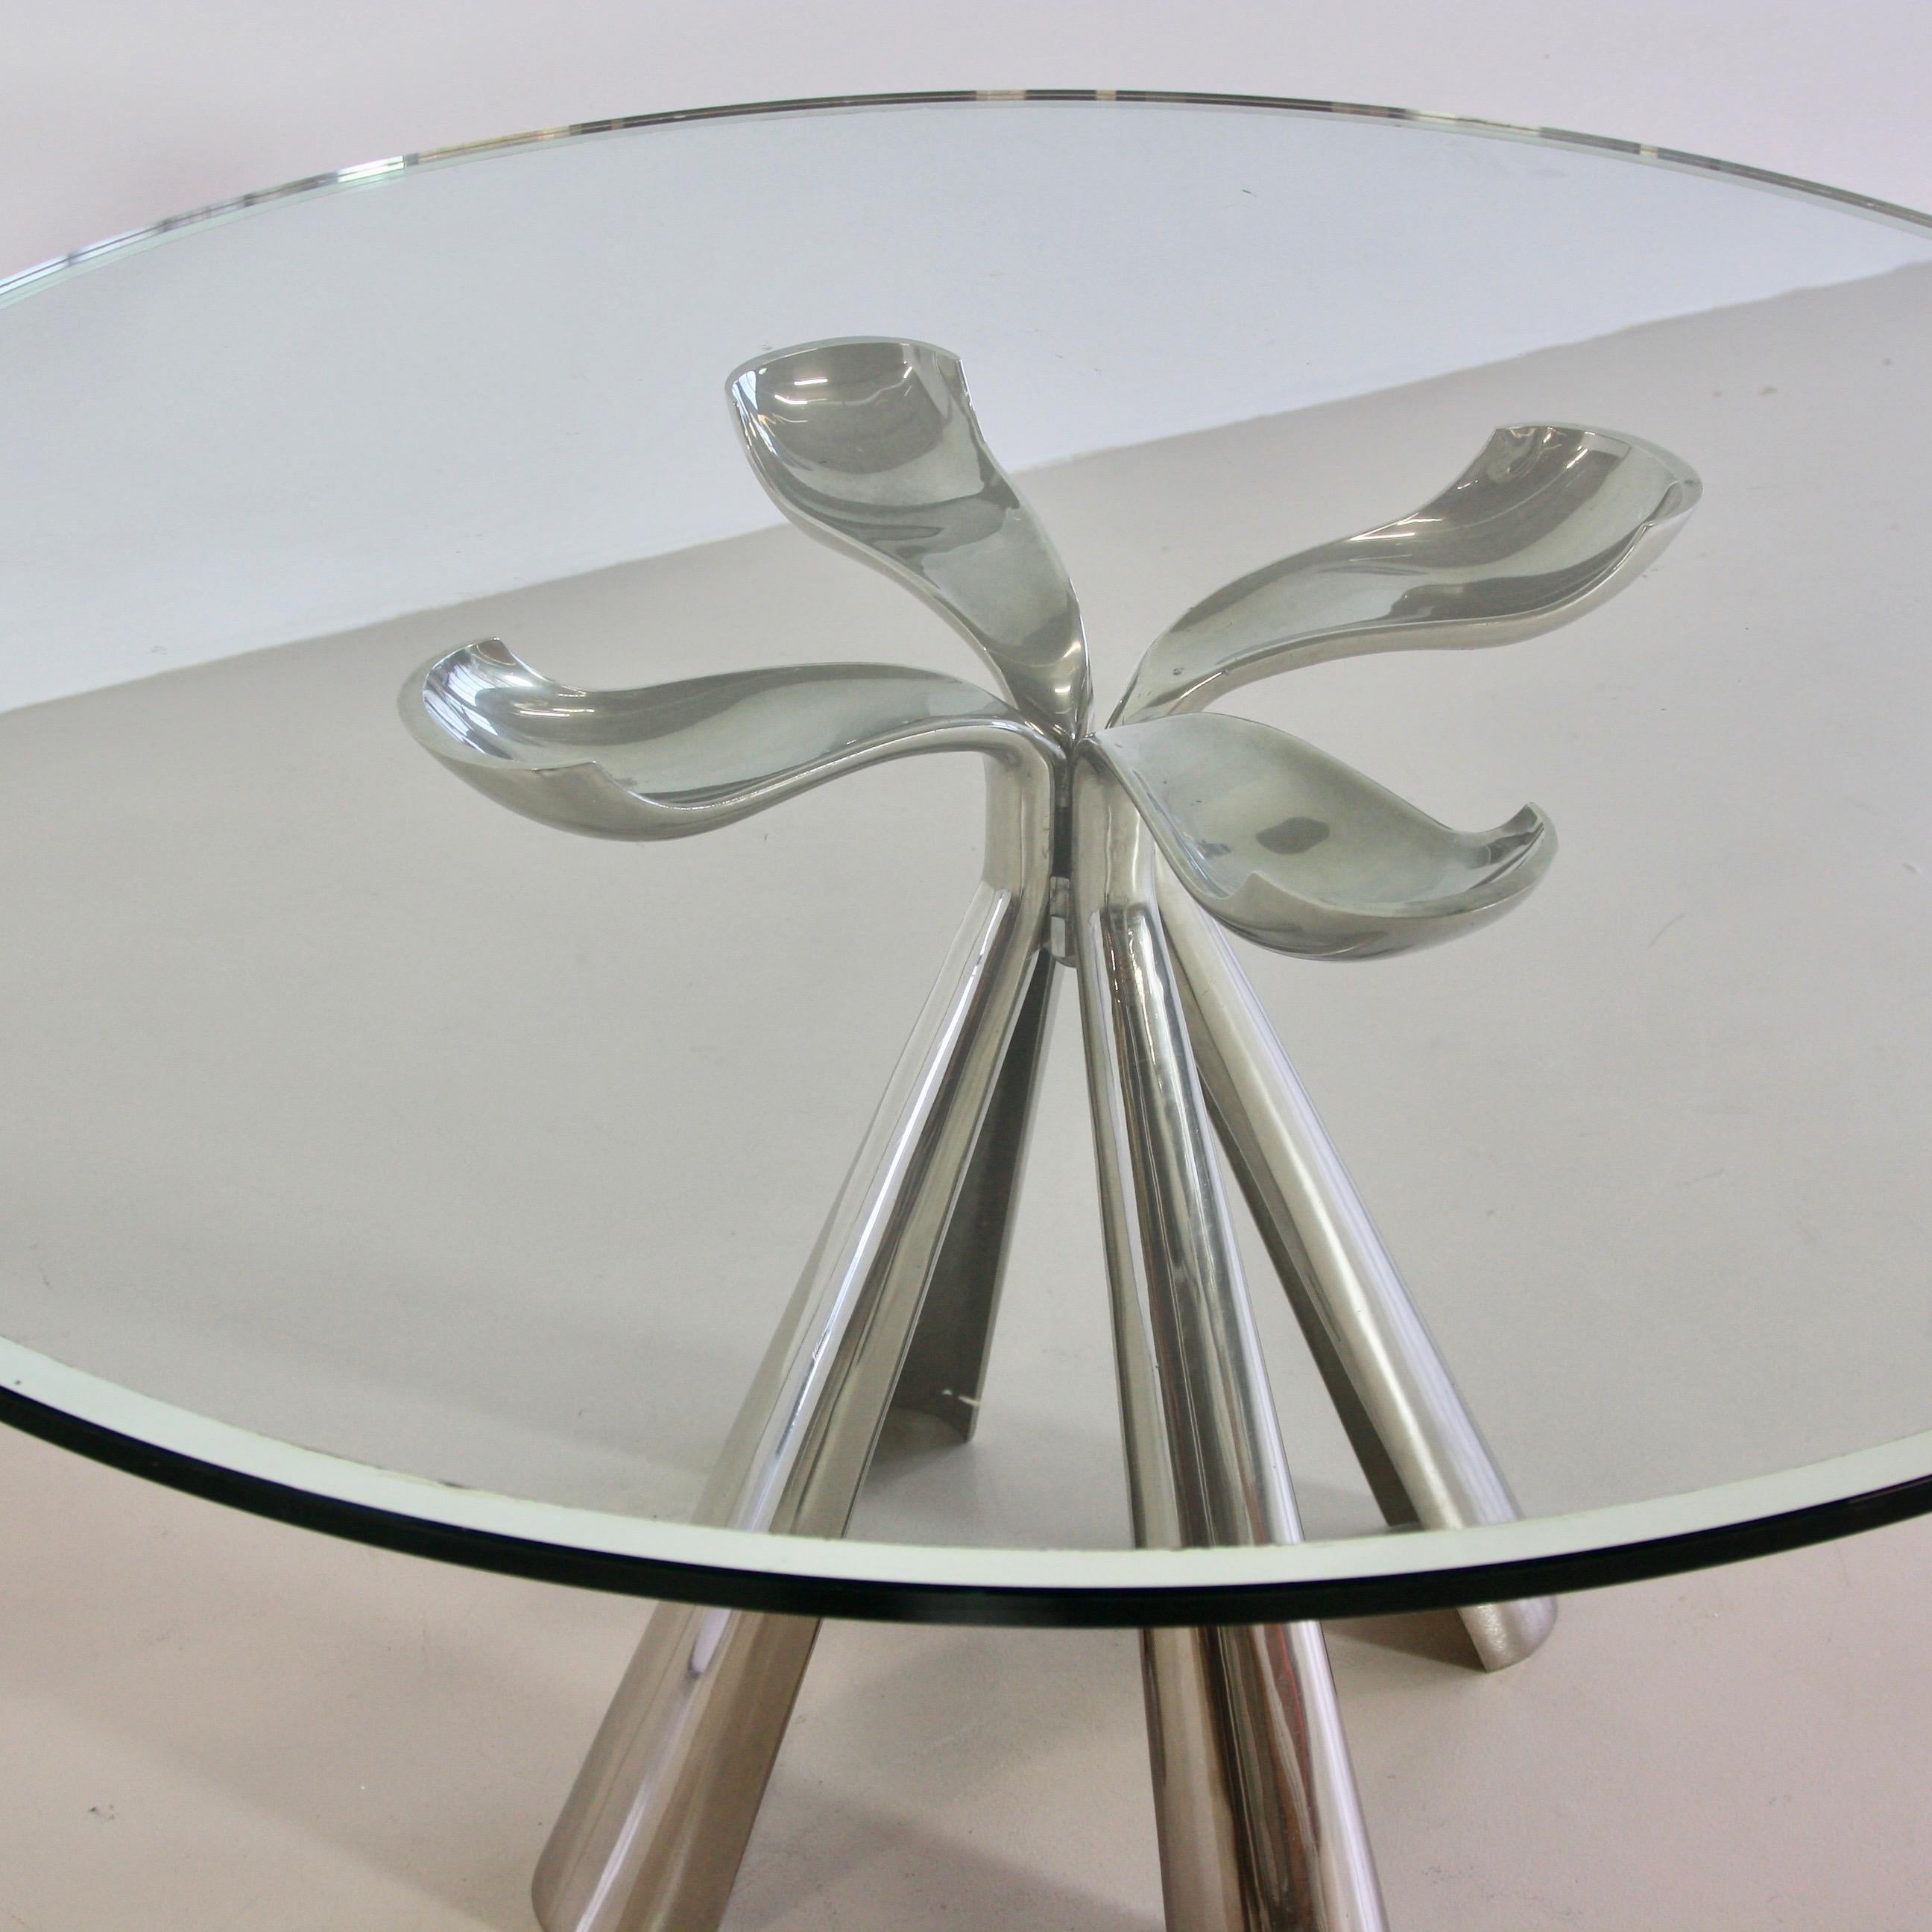 Aluminum Dining Table by Vittorio Introini for Saporiti, 1972 For Sale